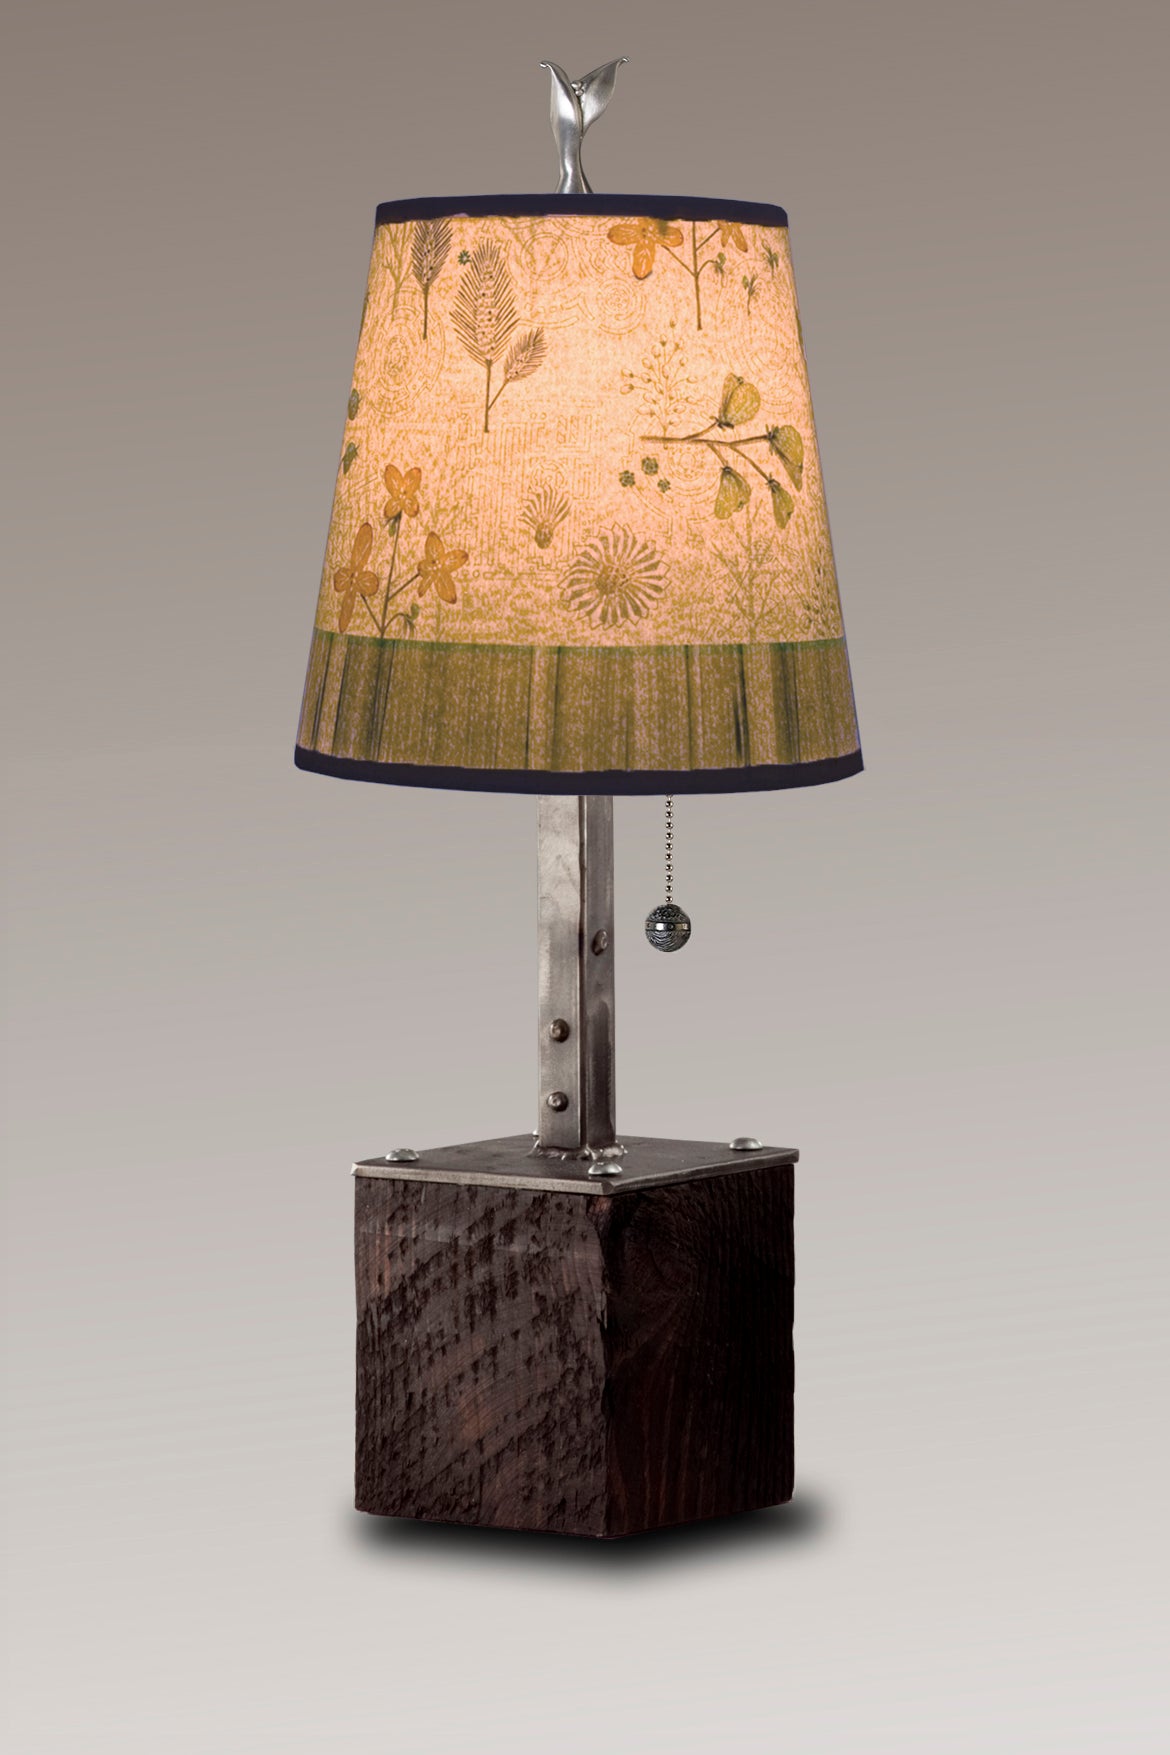 Janna Ugone & Co Table Lamps Steel Table Lamp on Reclaimed Wood with Small Drum Shade in Flora & Maze